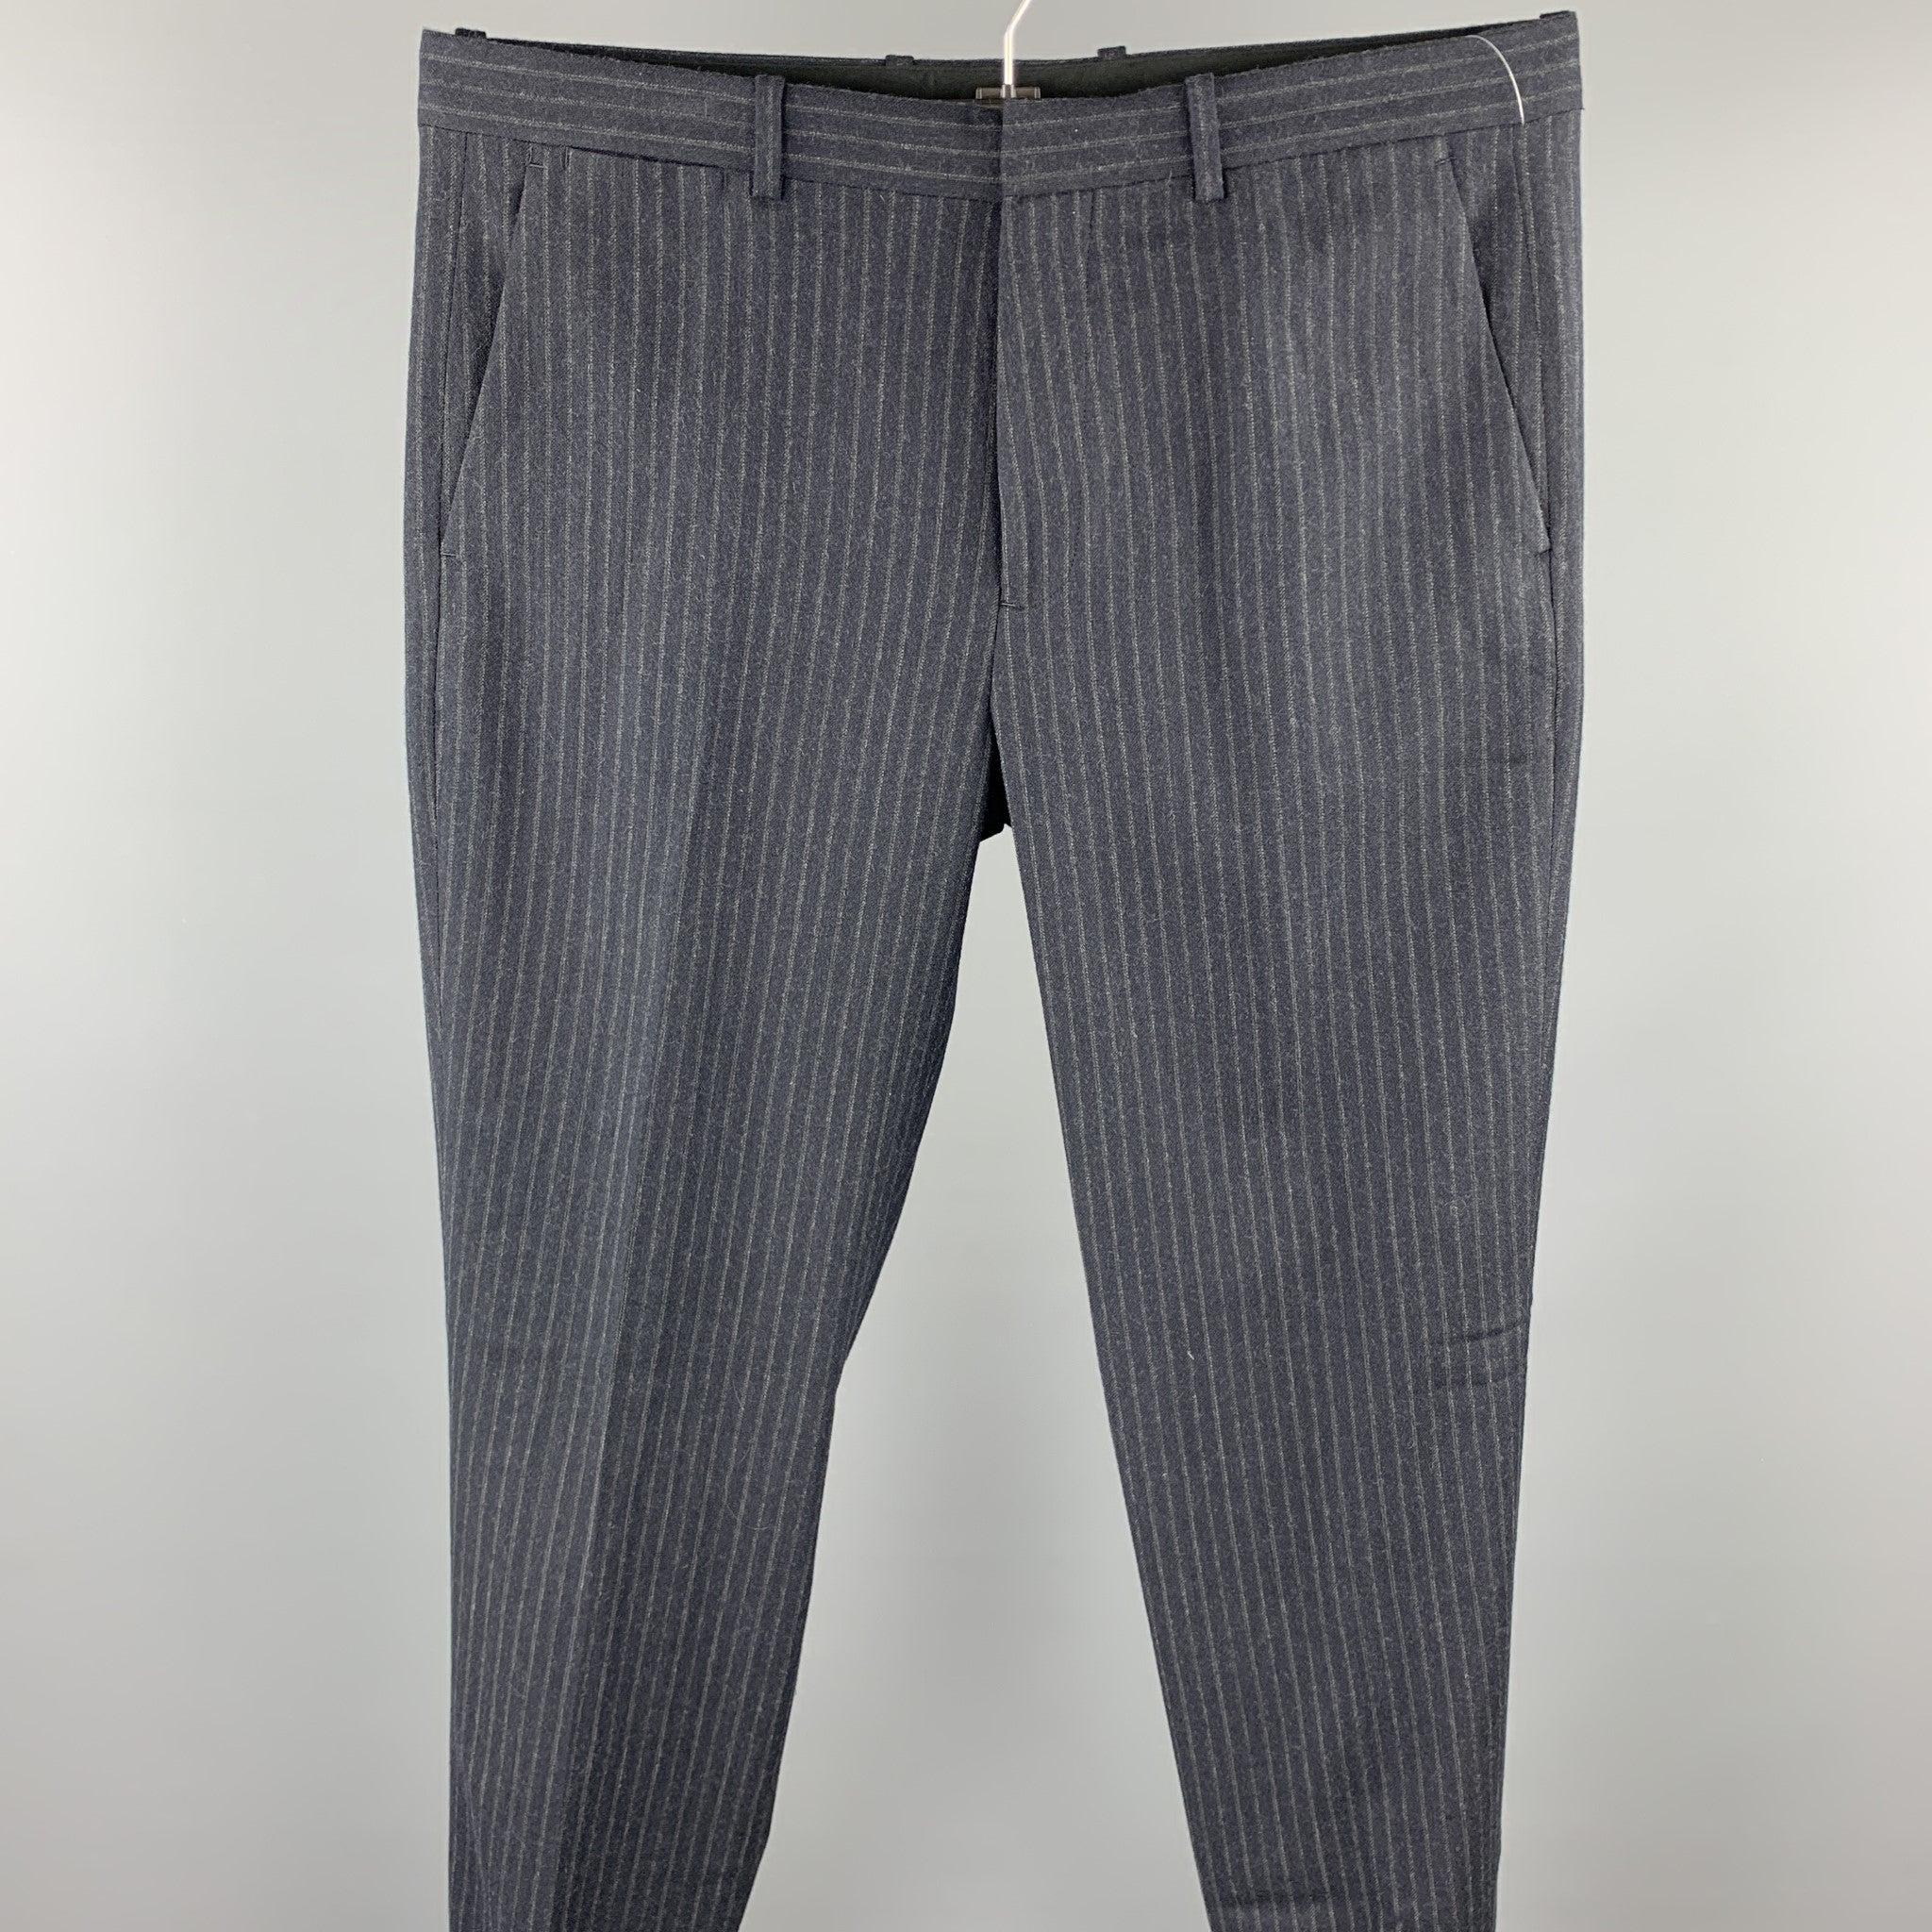 THEORY dress pants comes in a charcoal stripe wool featuring a flat front, cuffed leg, and a zip fly closure.
Excellent
Pre-Owned Condition. 

Marked:   34 

Measurements: 
  Waist: 36 inches 
Rise: 10 inches 
Inseam: 32 inches 
  
  
 
Reference: